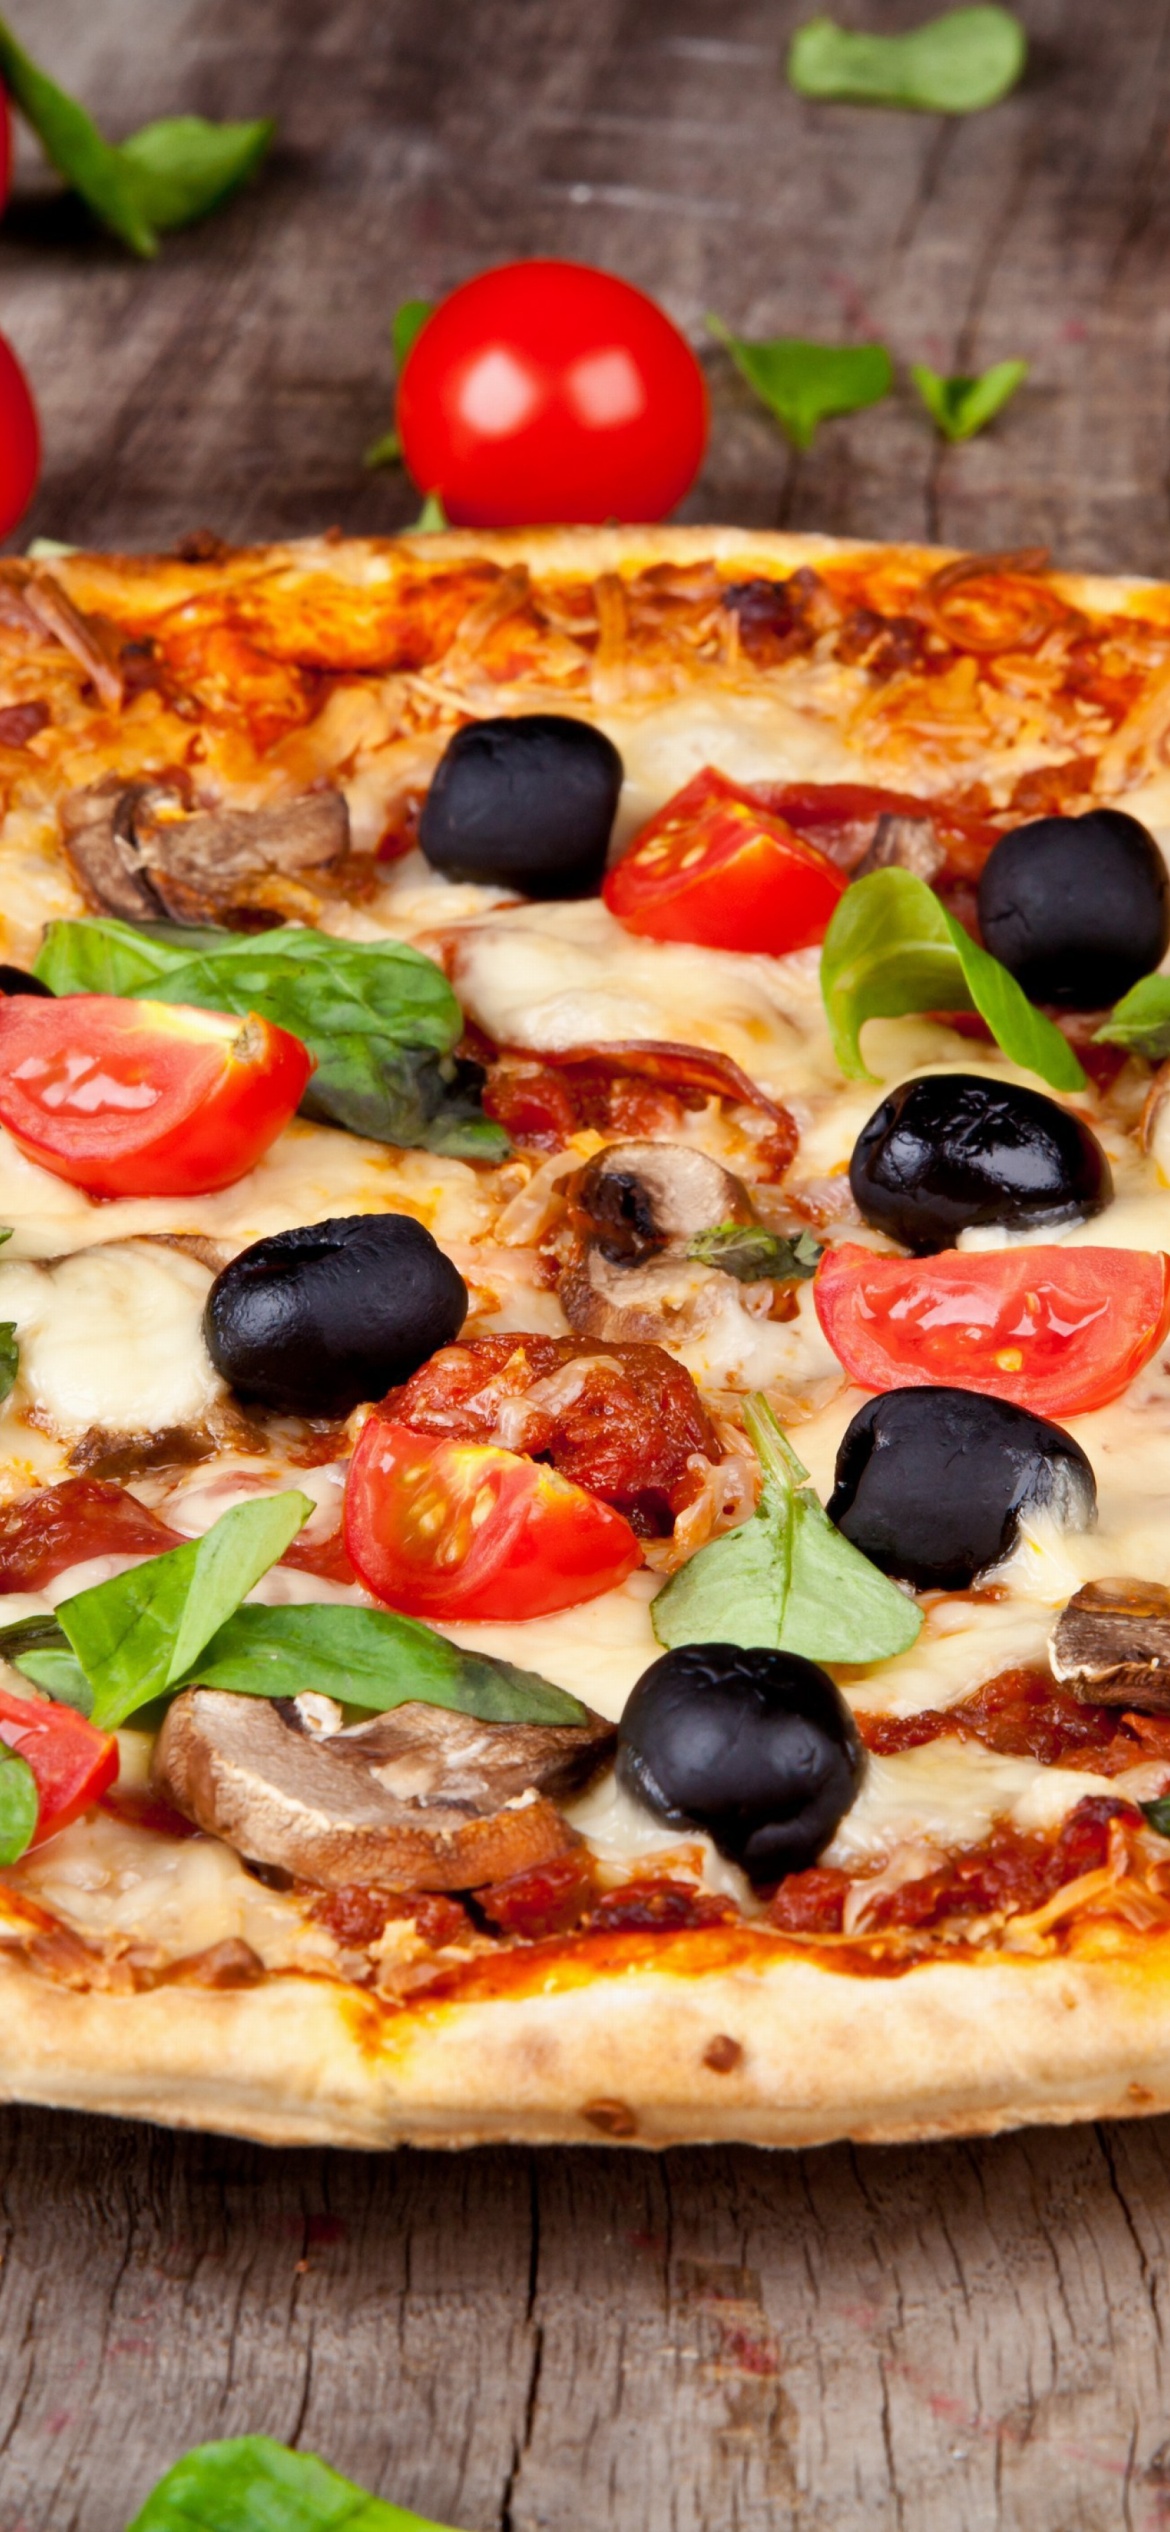 Sfondi Pizza with tomatoes and olives 1170x2532